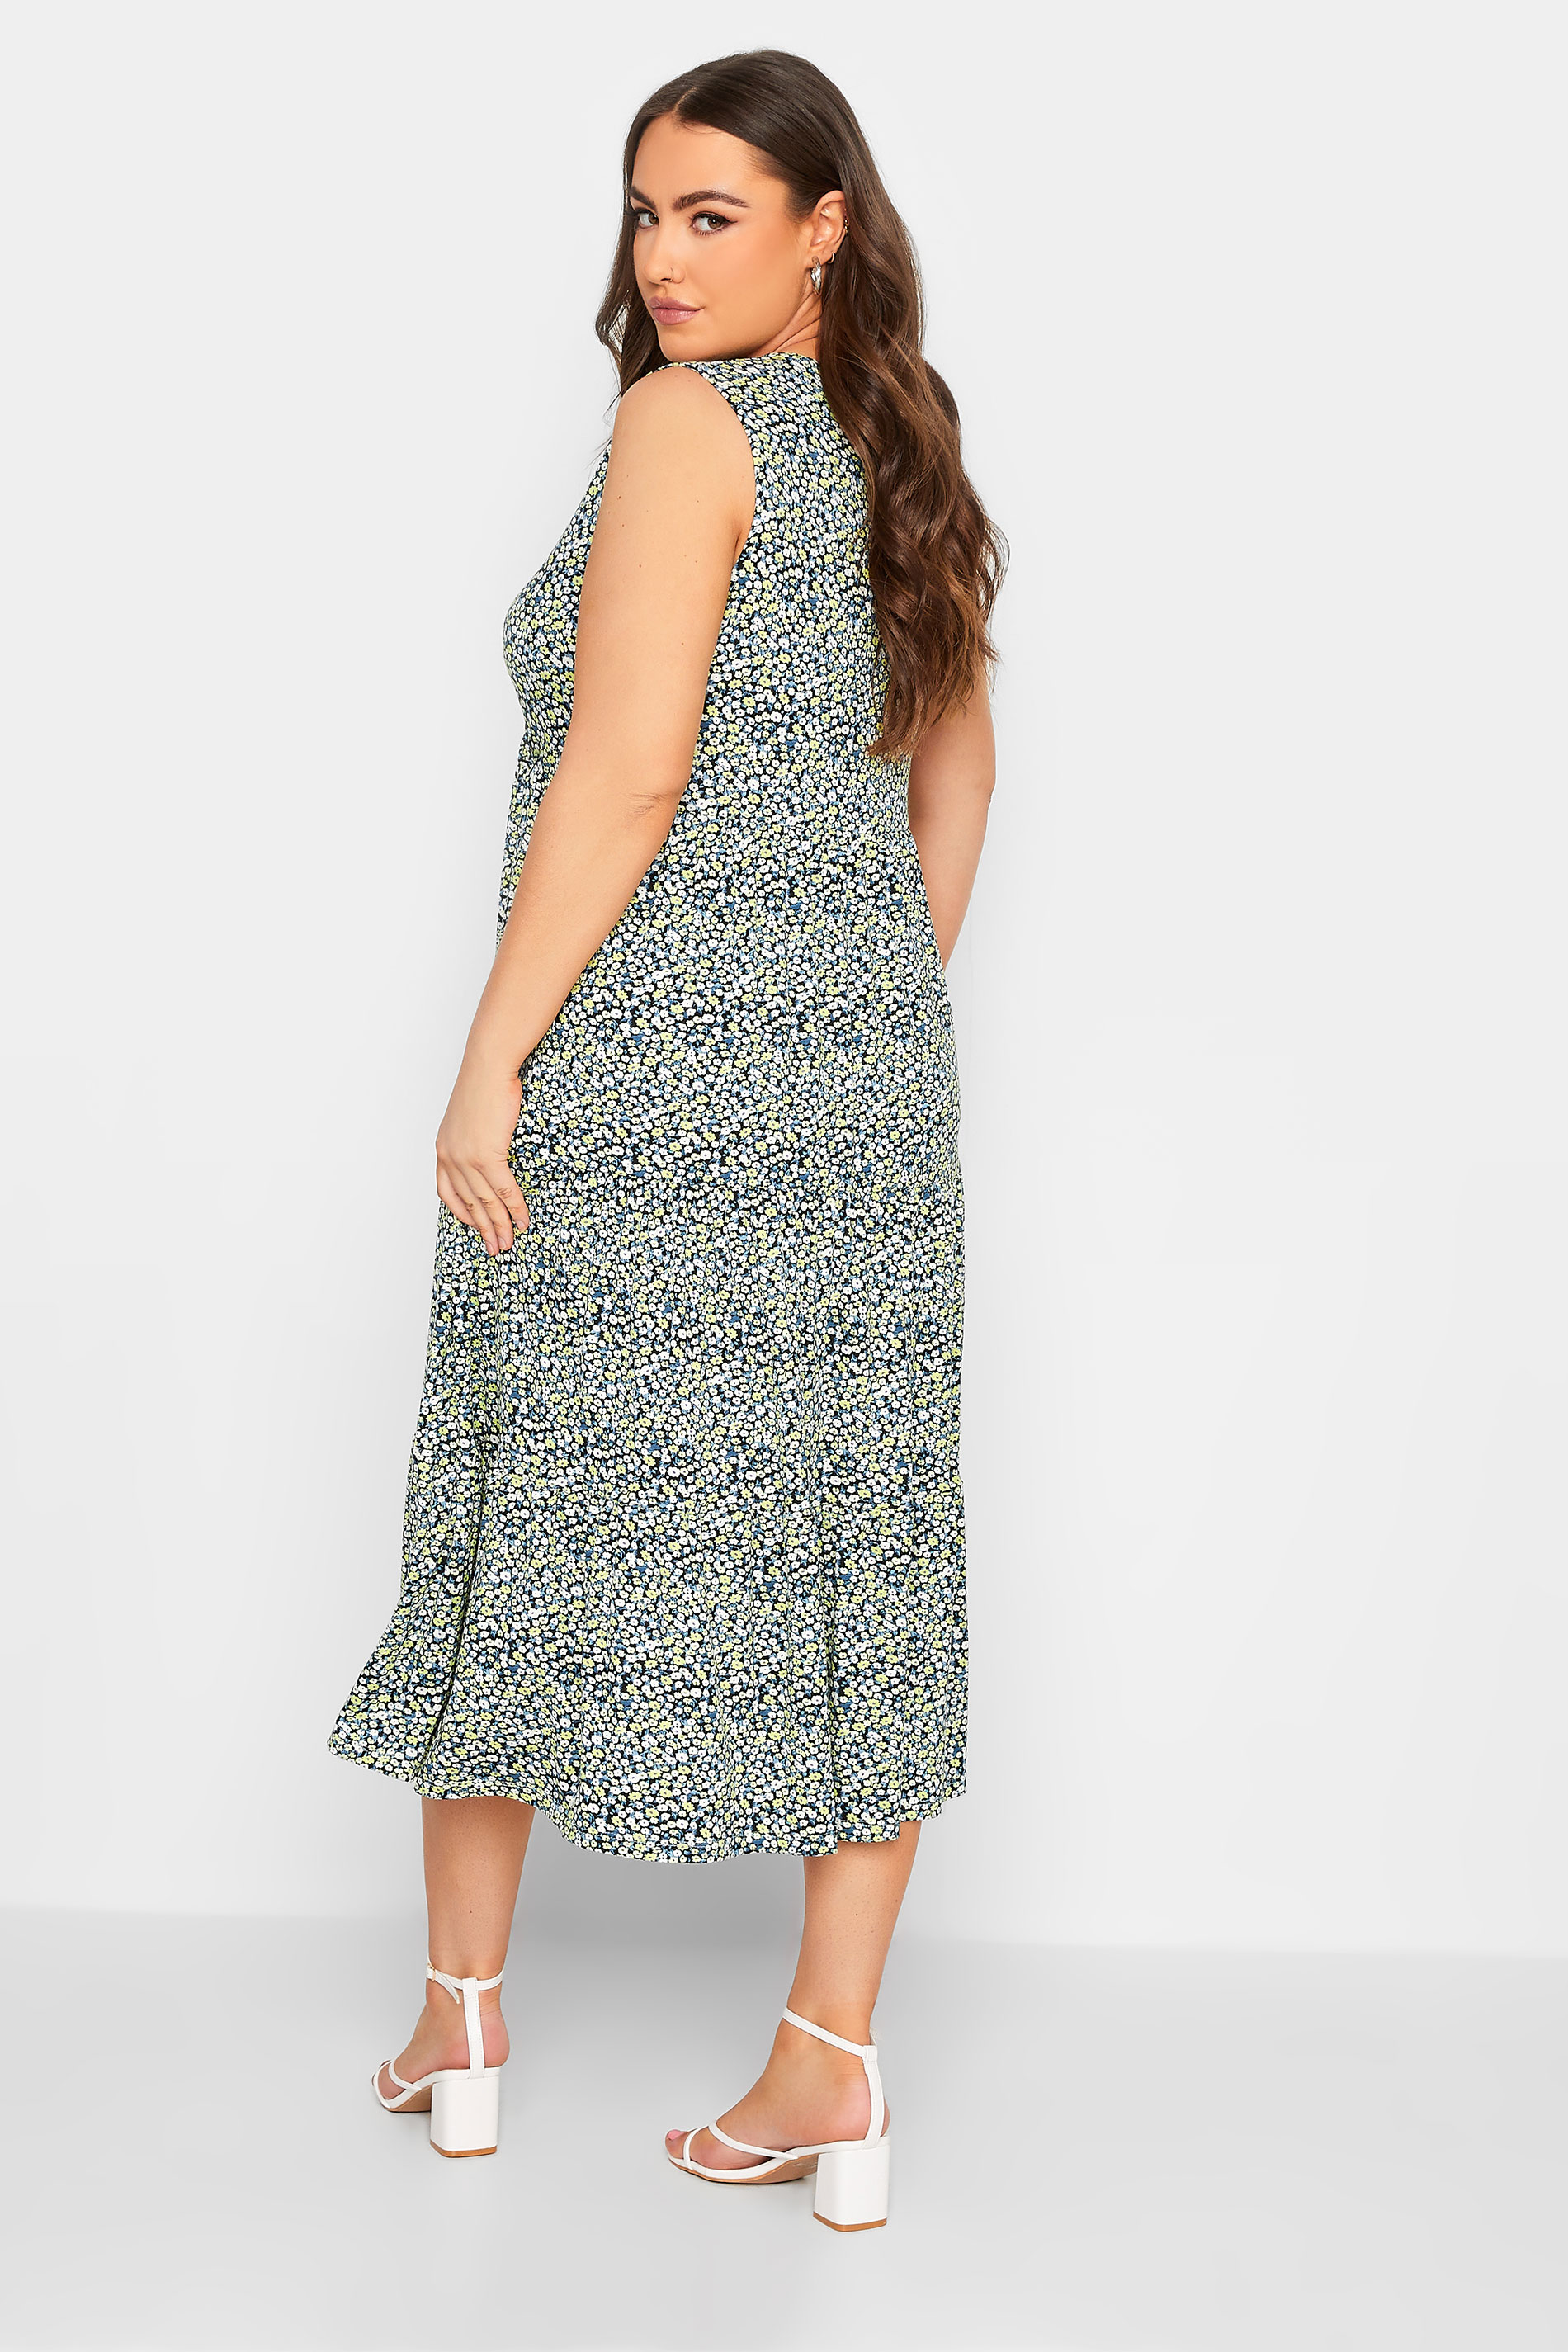 YOURS Curve Plus Size Blue Floral Ditsy Print Maxi Wrap Dress | Yours Clothing  3